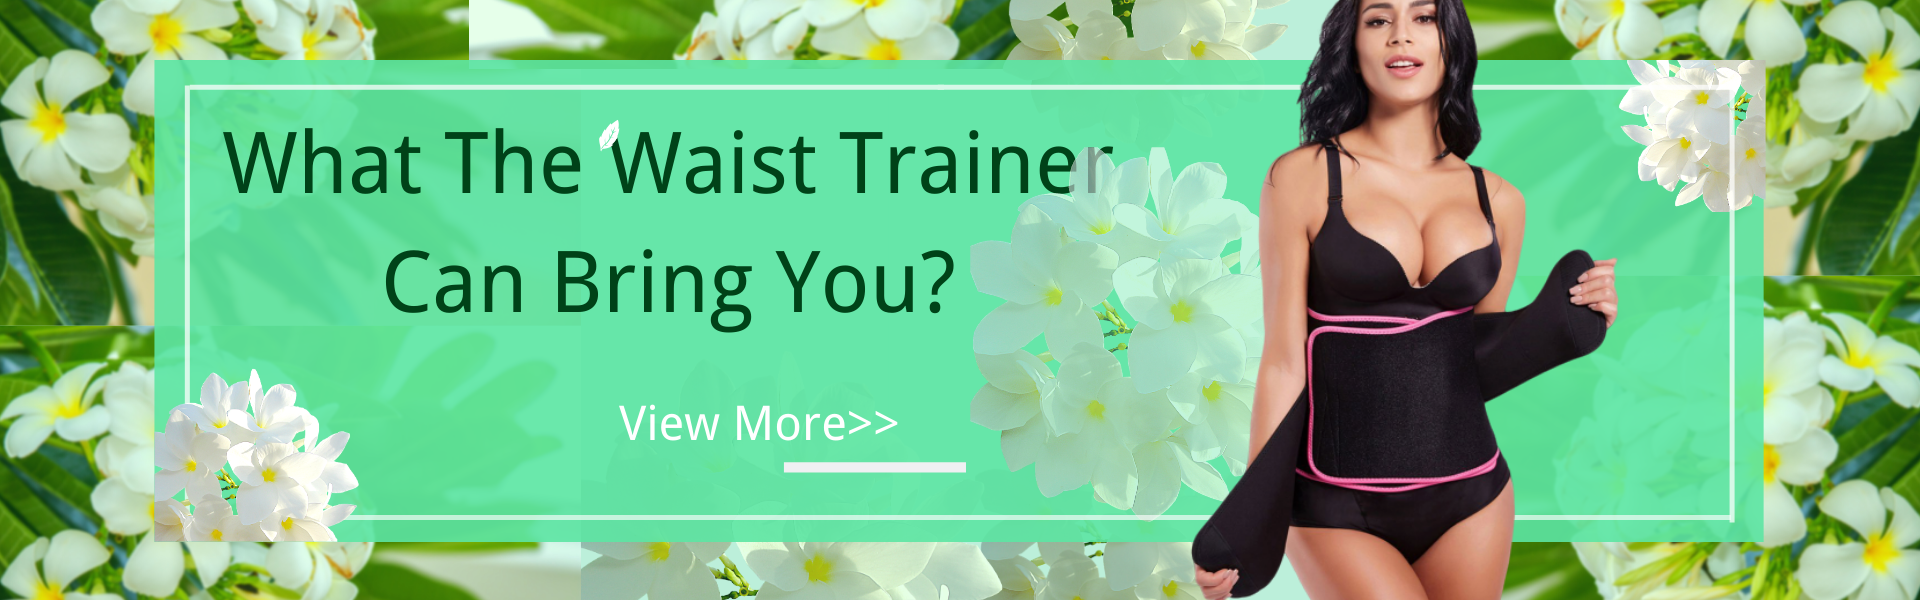 What The Waist Trainer Can Bring You?